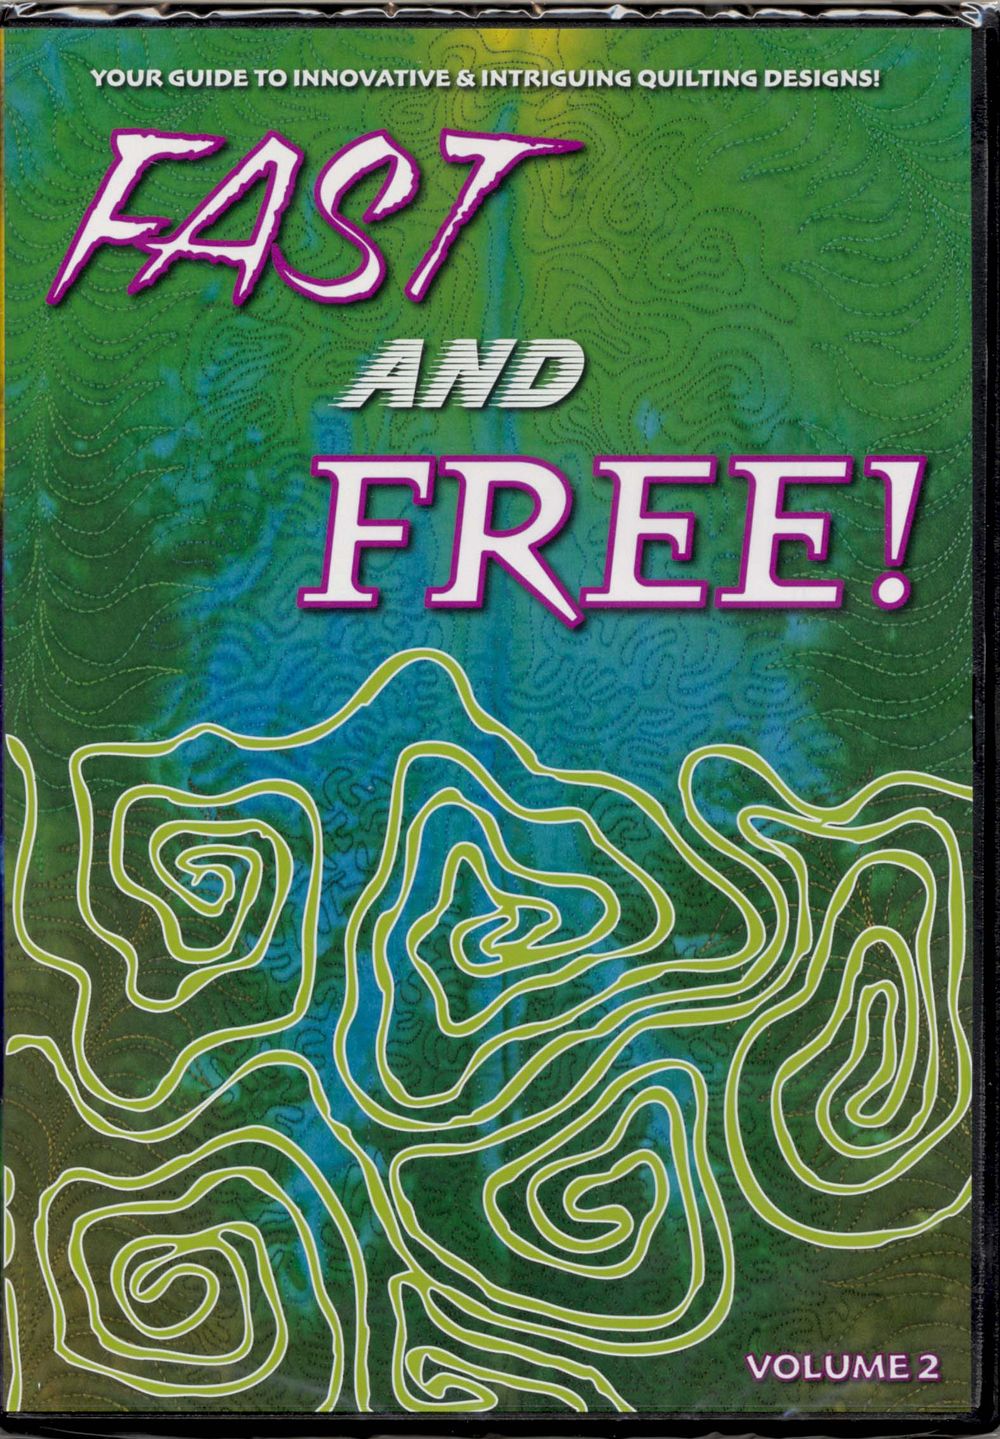 Fast And Free Volume 2 Machine Quilting Video on DVD with Patsy Thompson for Patsy Thompson Designs